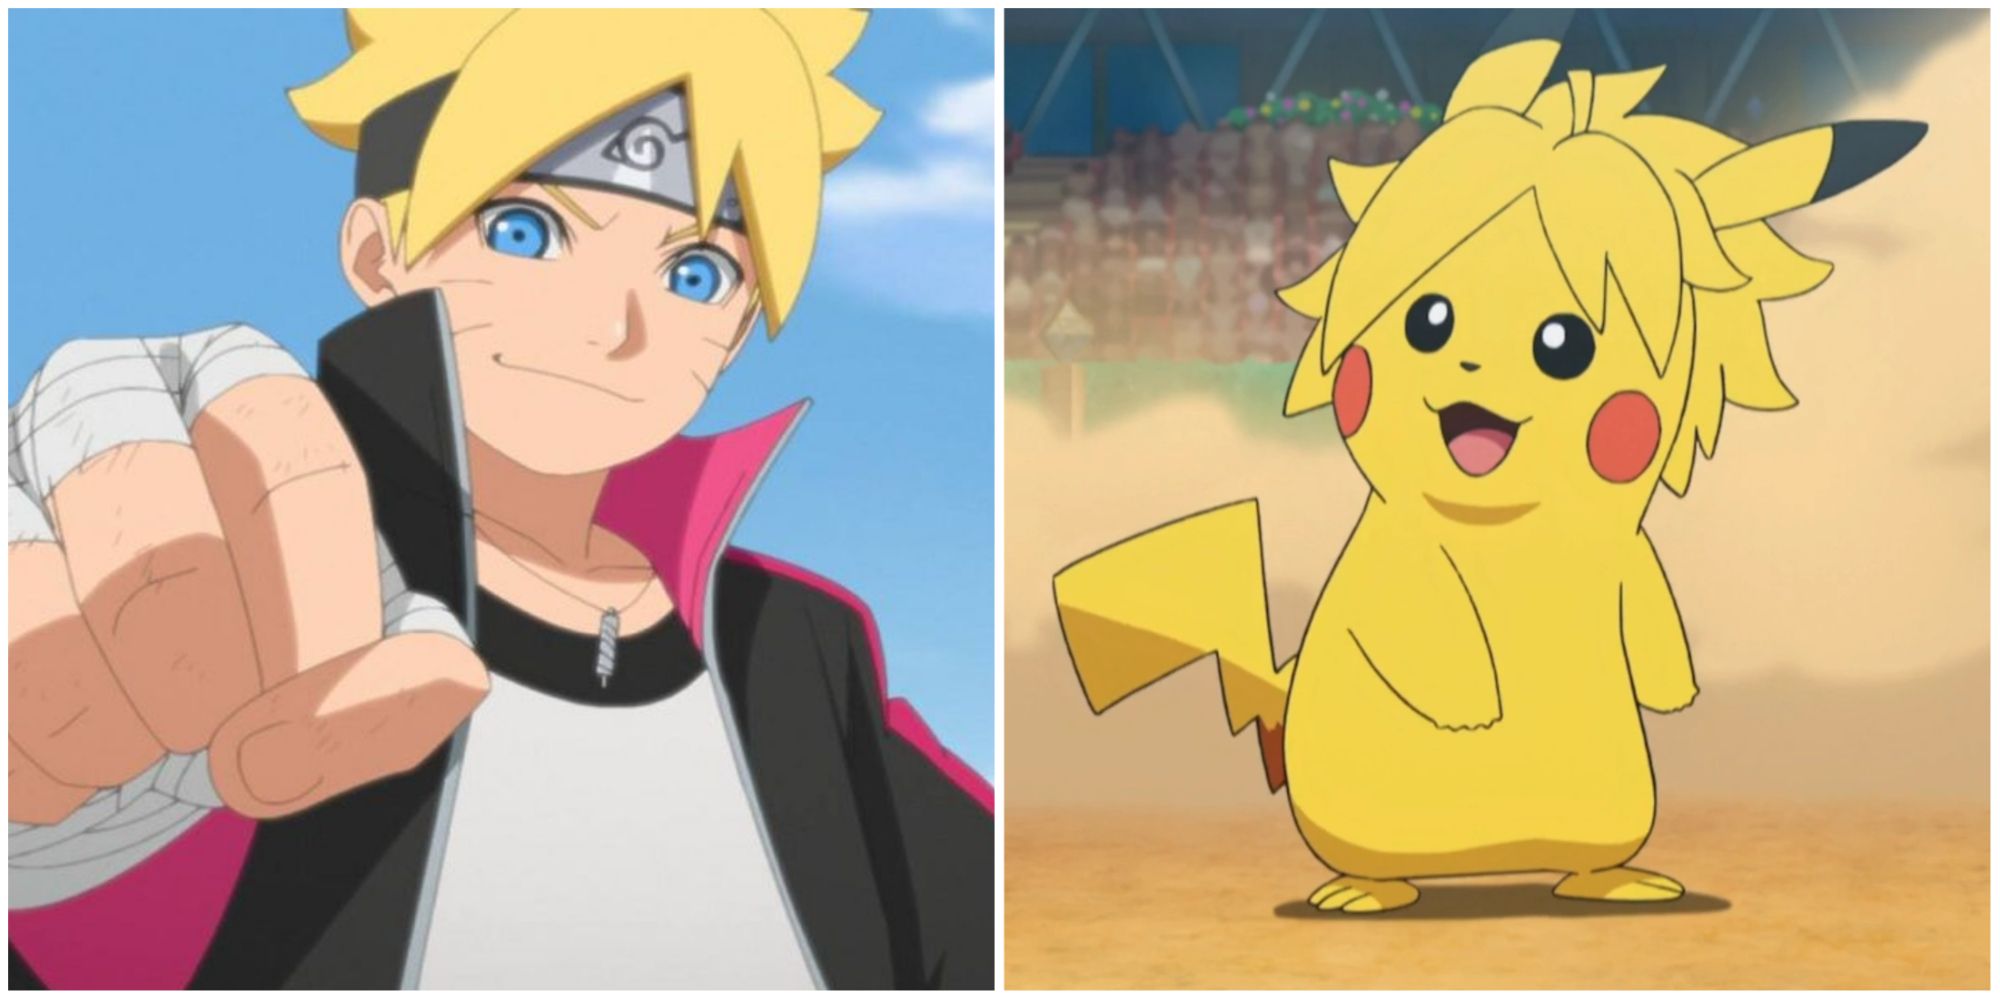 naruto characters as pokemon trainers